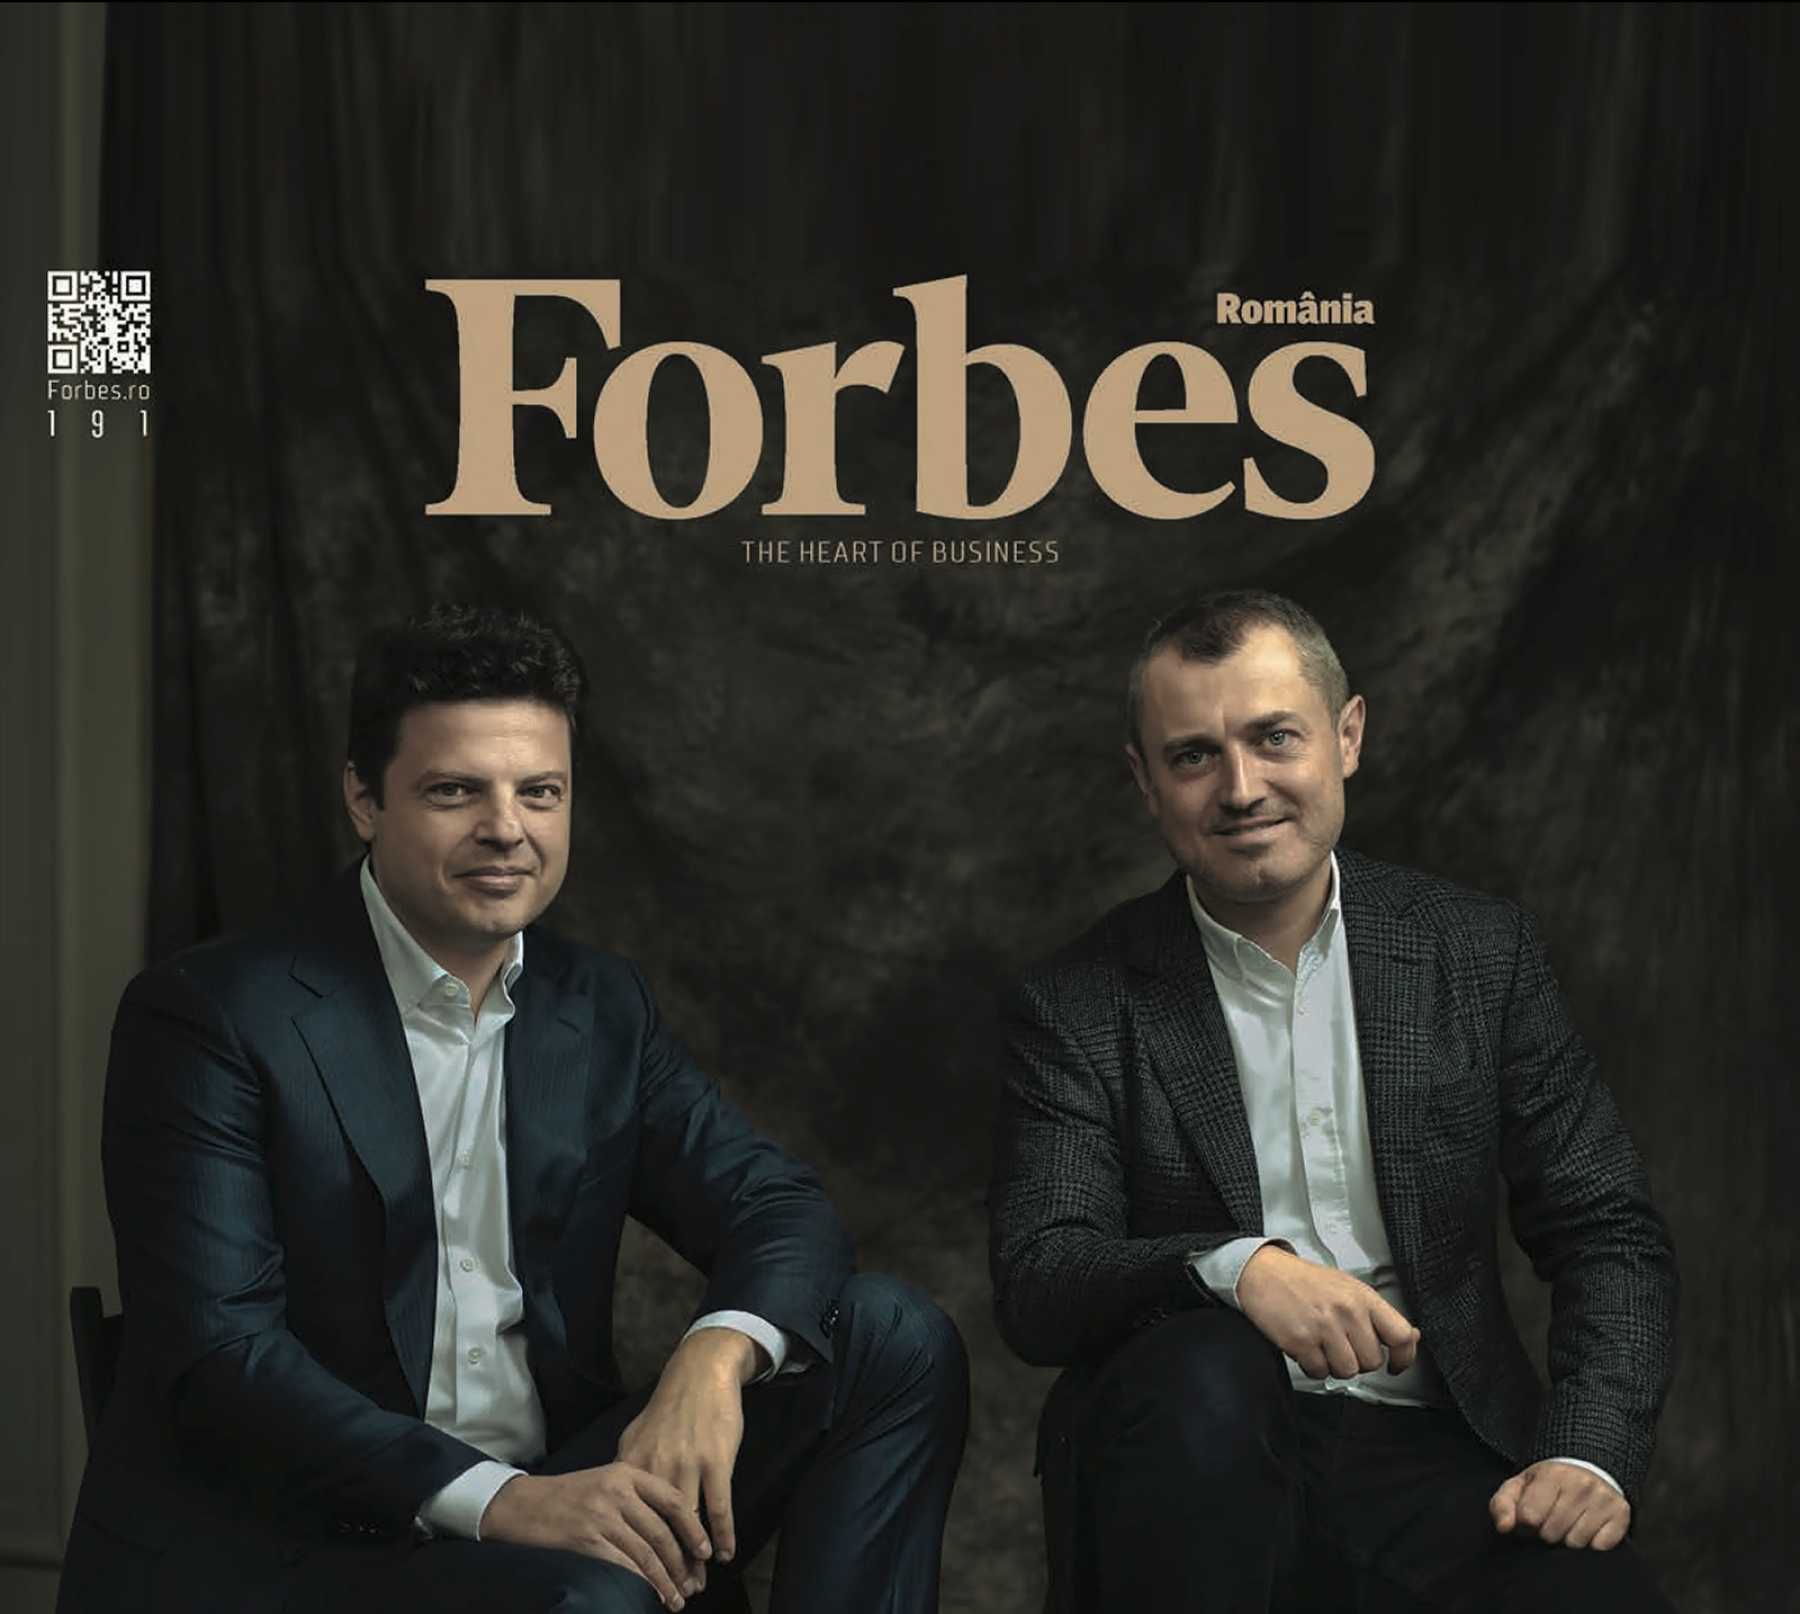 Victor Căpitanu and Andrei Diaconescu, founders of One United Properties, speak about their beginnings in the business and future insights of the company in the latest Forbes Romania cover story